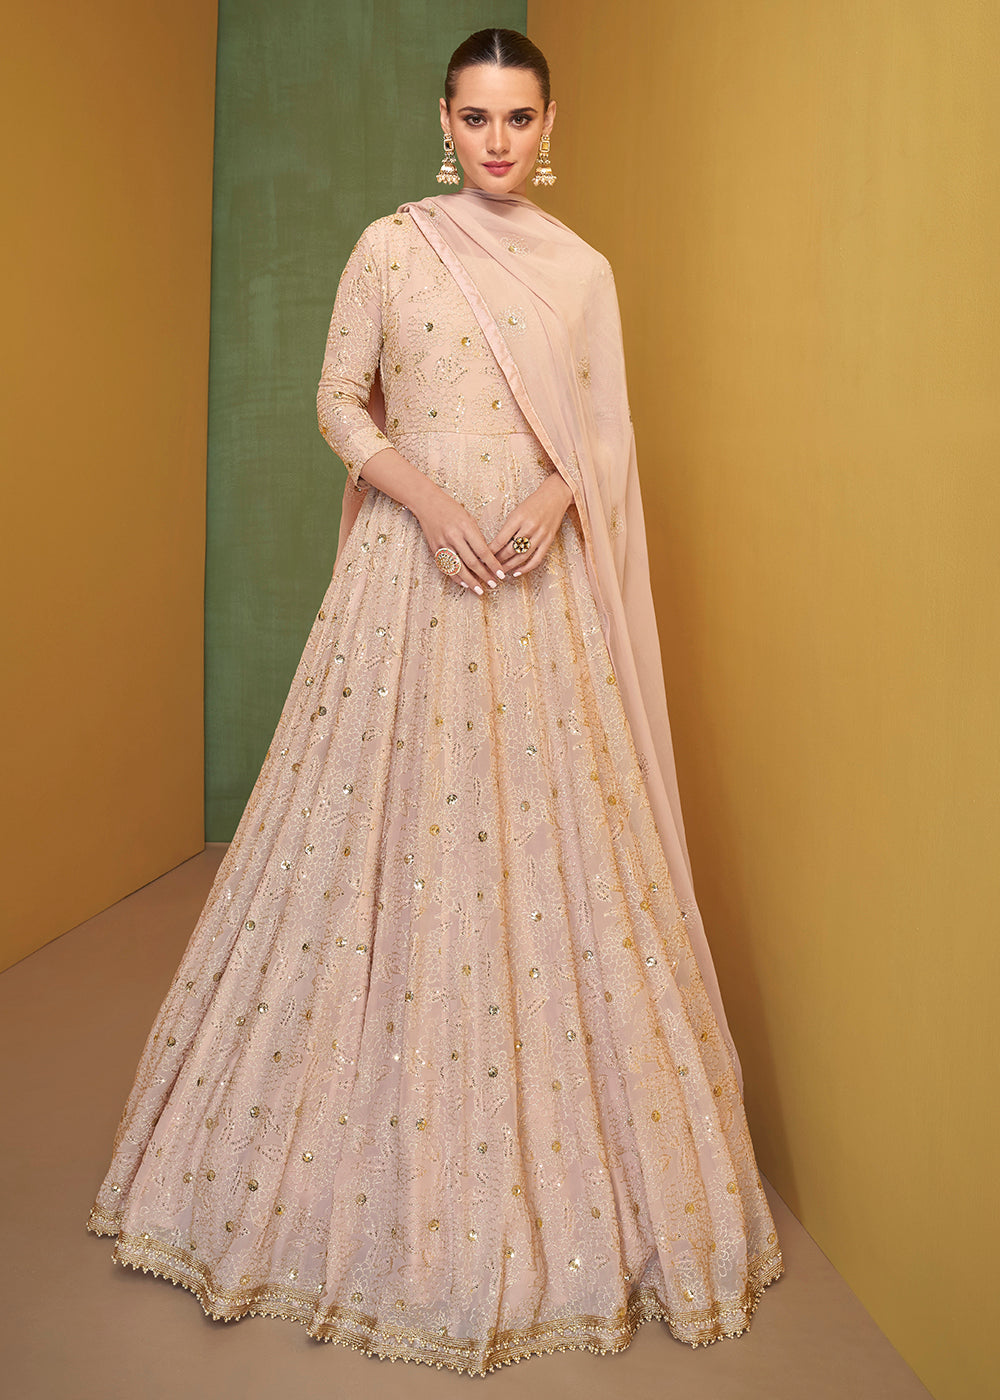 Buy Now Pretty Peachy Pink Wedding Embroidered Bridal Anarkali Gown Online in USA, UK, Australia, New Zealand, Canada & Worldwide at Empress Clothing.